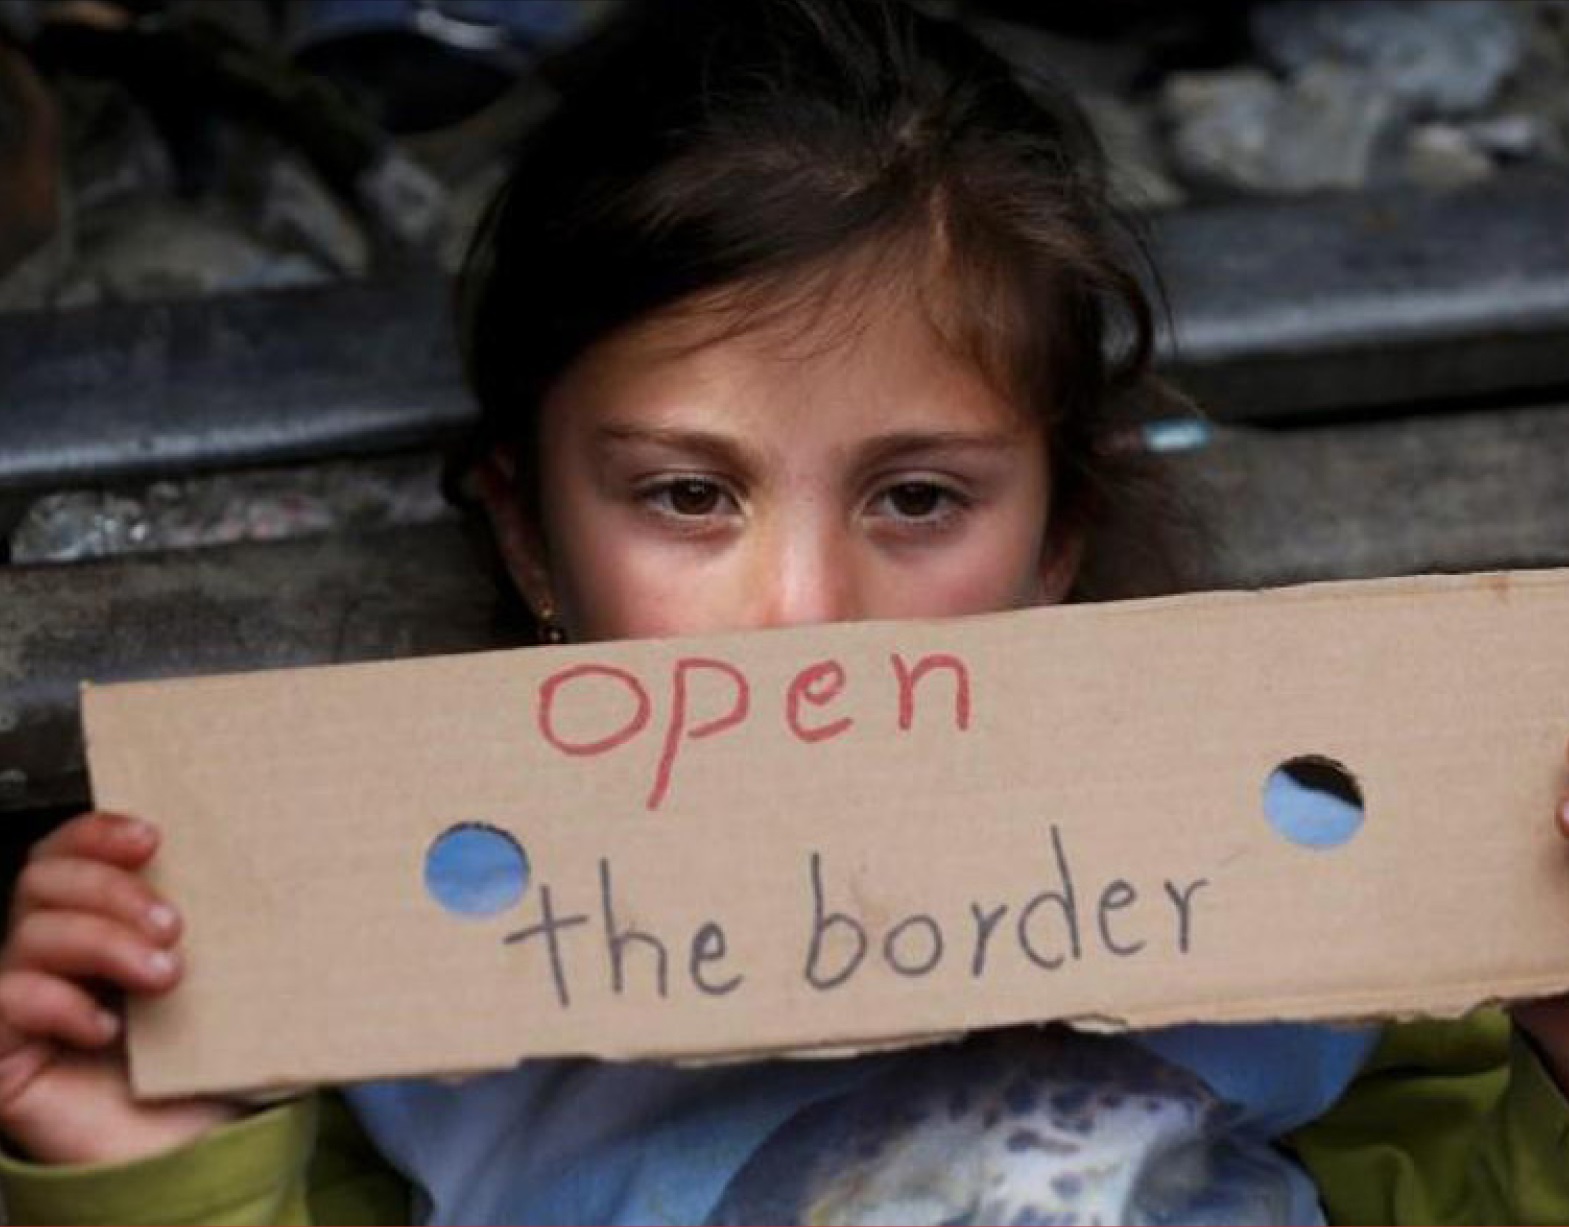 Child holding up a sign that reads "Open the Border"